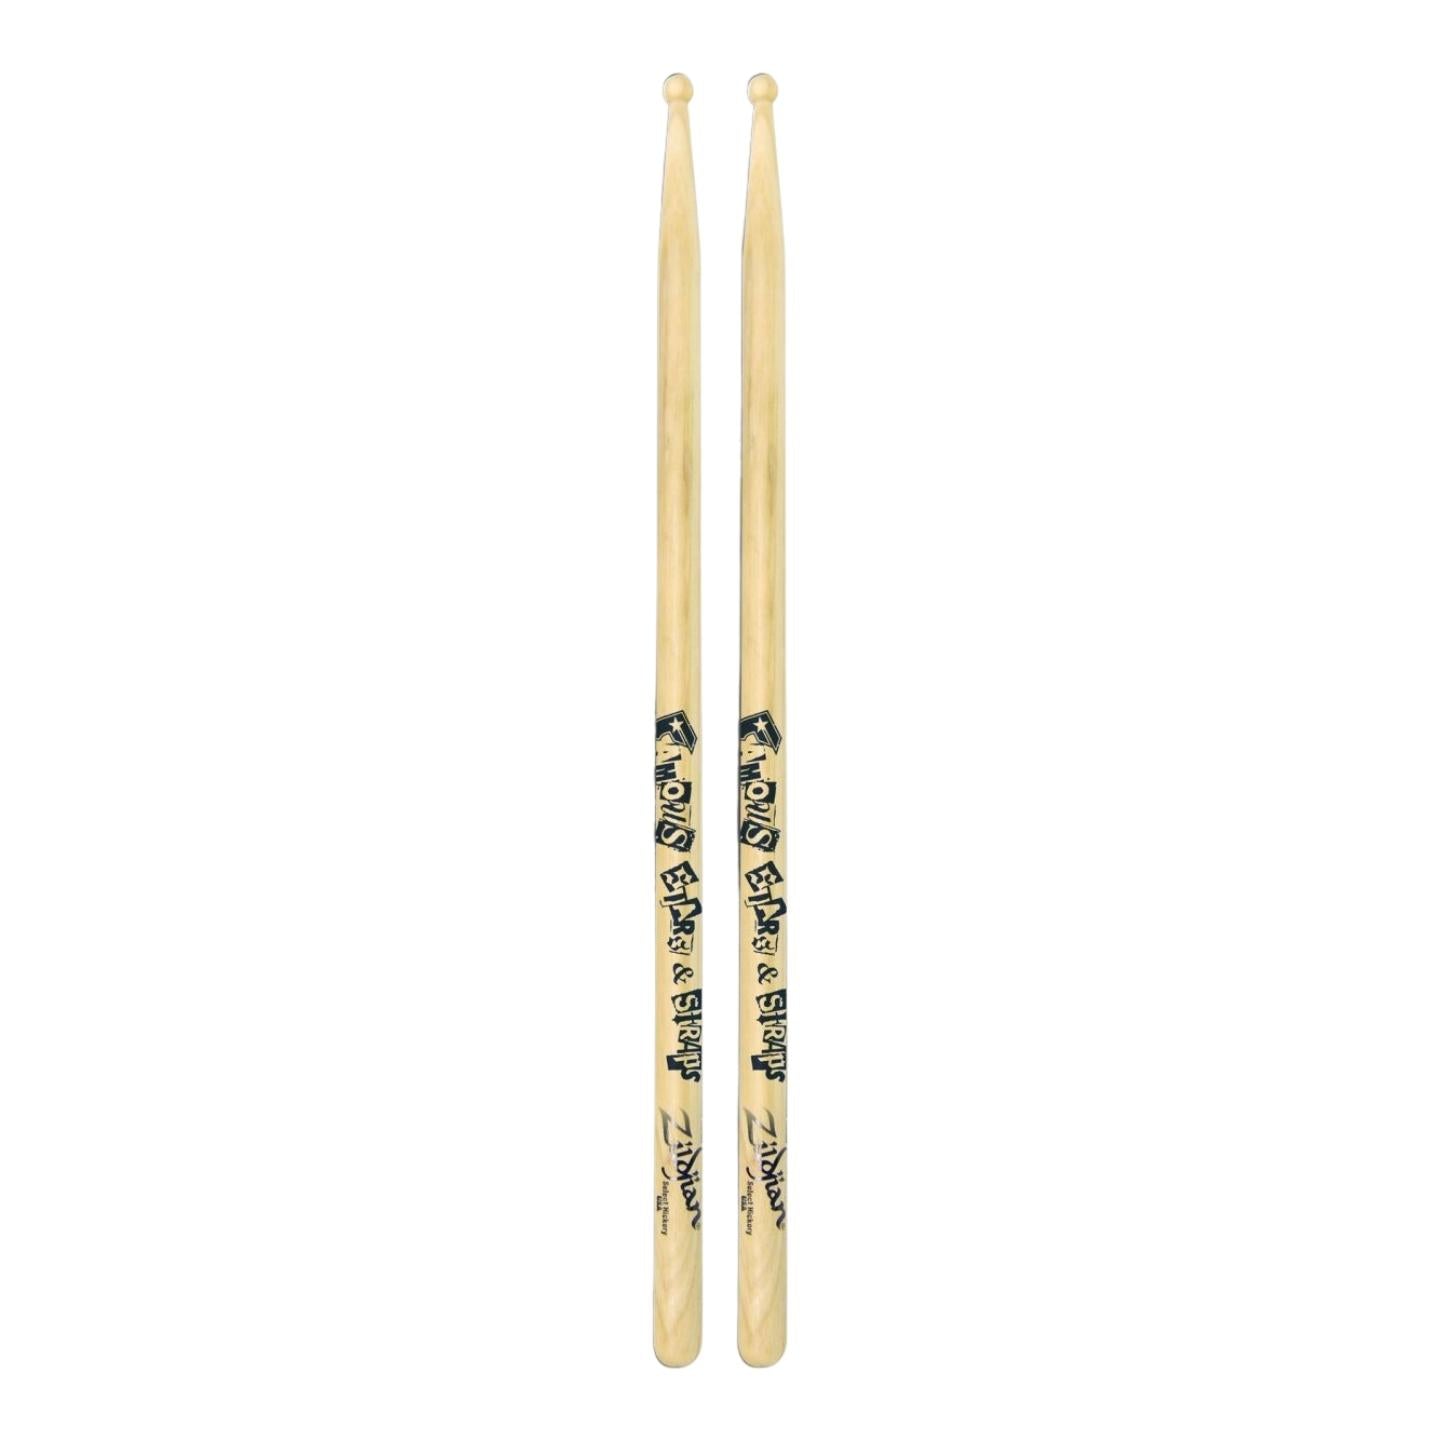 Zildjian Travis Barker Famous Stars & Straps Artist Series Hickory Drumsticks with Round Tips, Lacquer Coating | ZASTBF